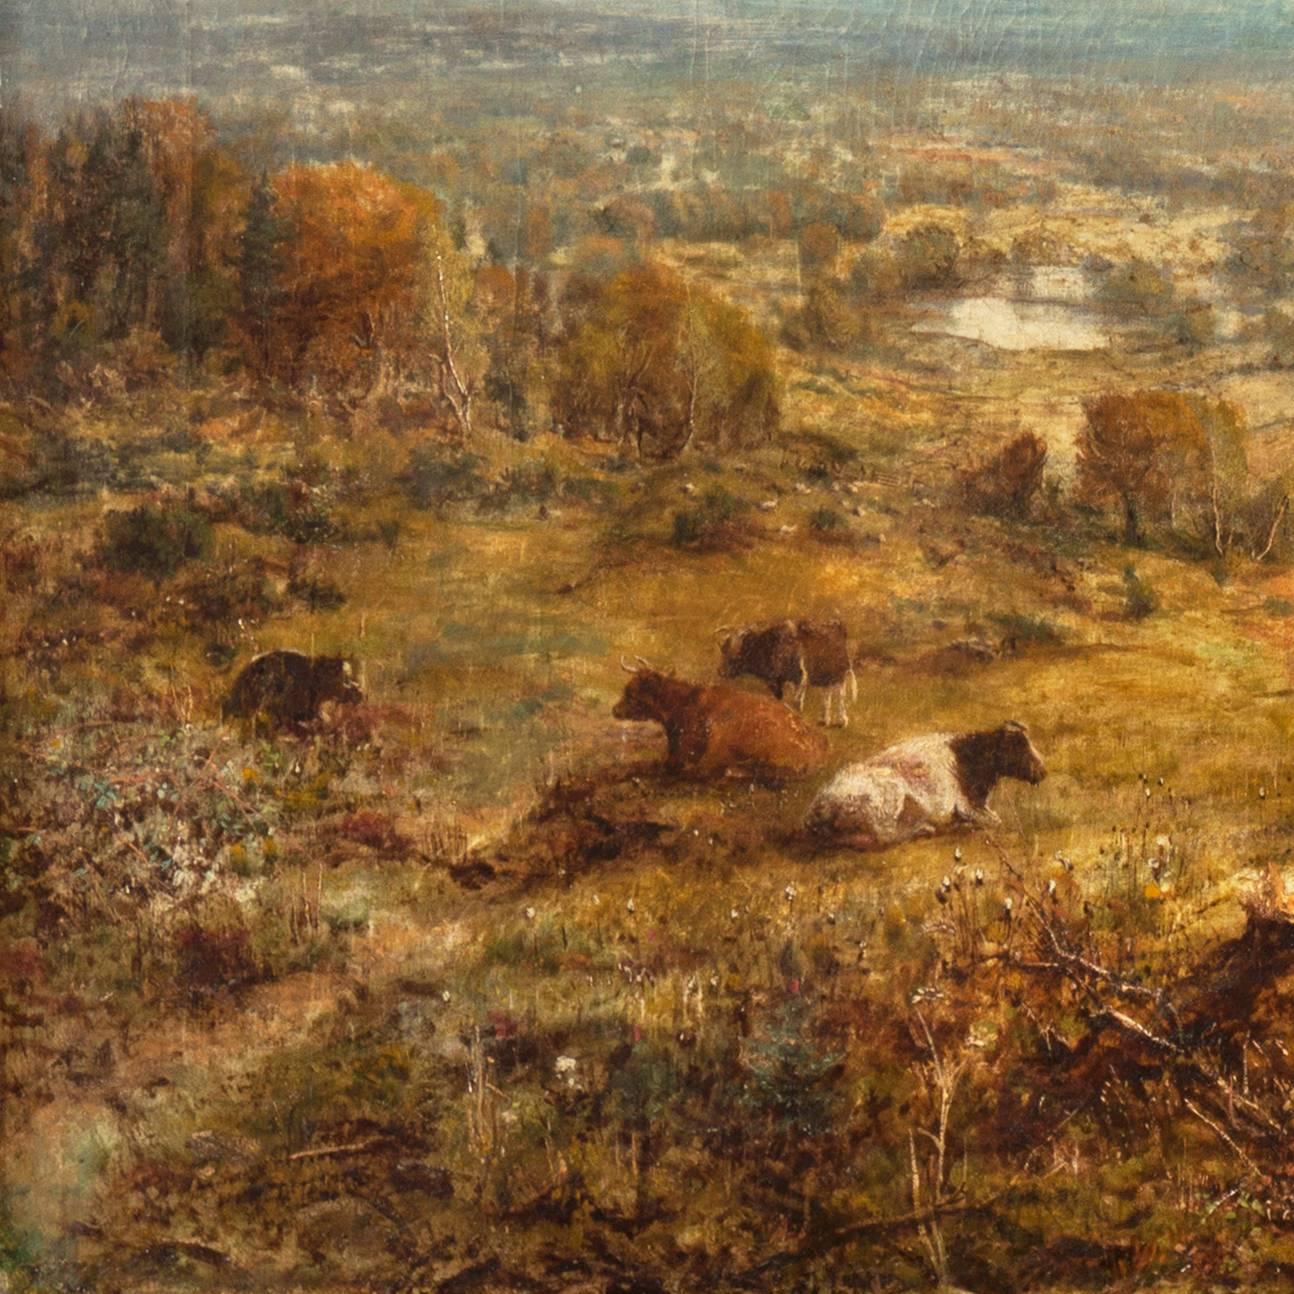 Signed lower right, "G.W. Mote" and dated 1881. 

A substantial and lyrical oil landscape showing a panoramic view of the countryside surrounding the town of Guildford in the English county of Surrey with cattle resting in the foreground